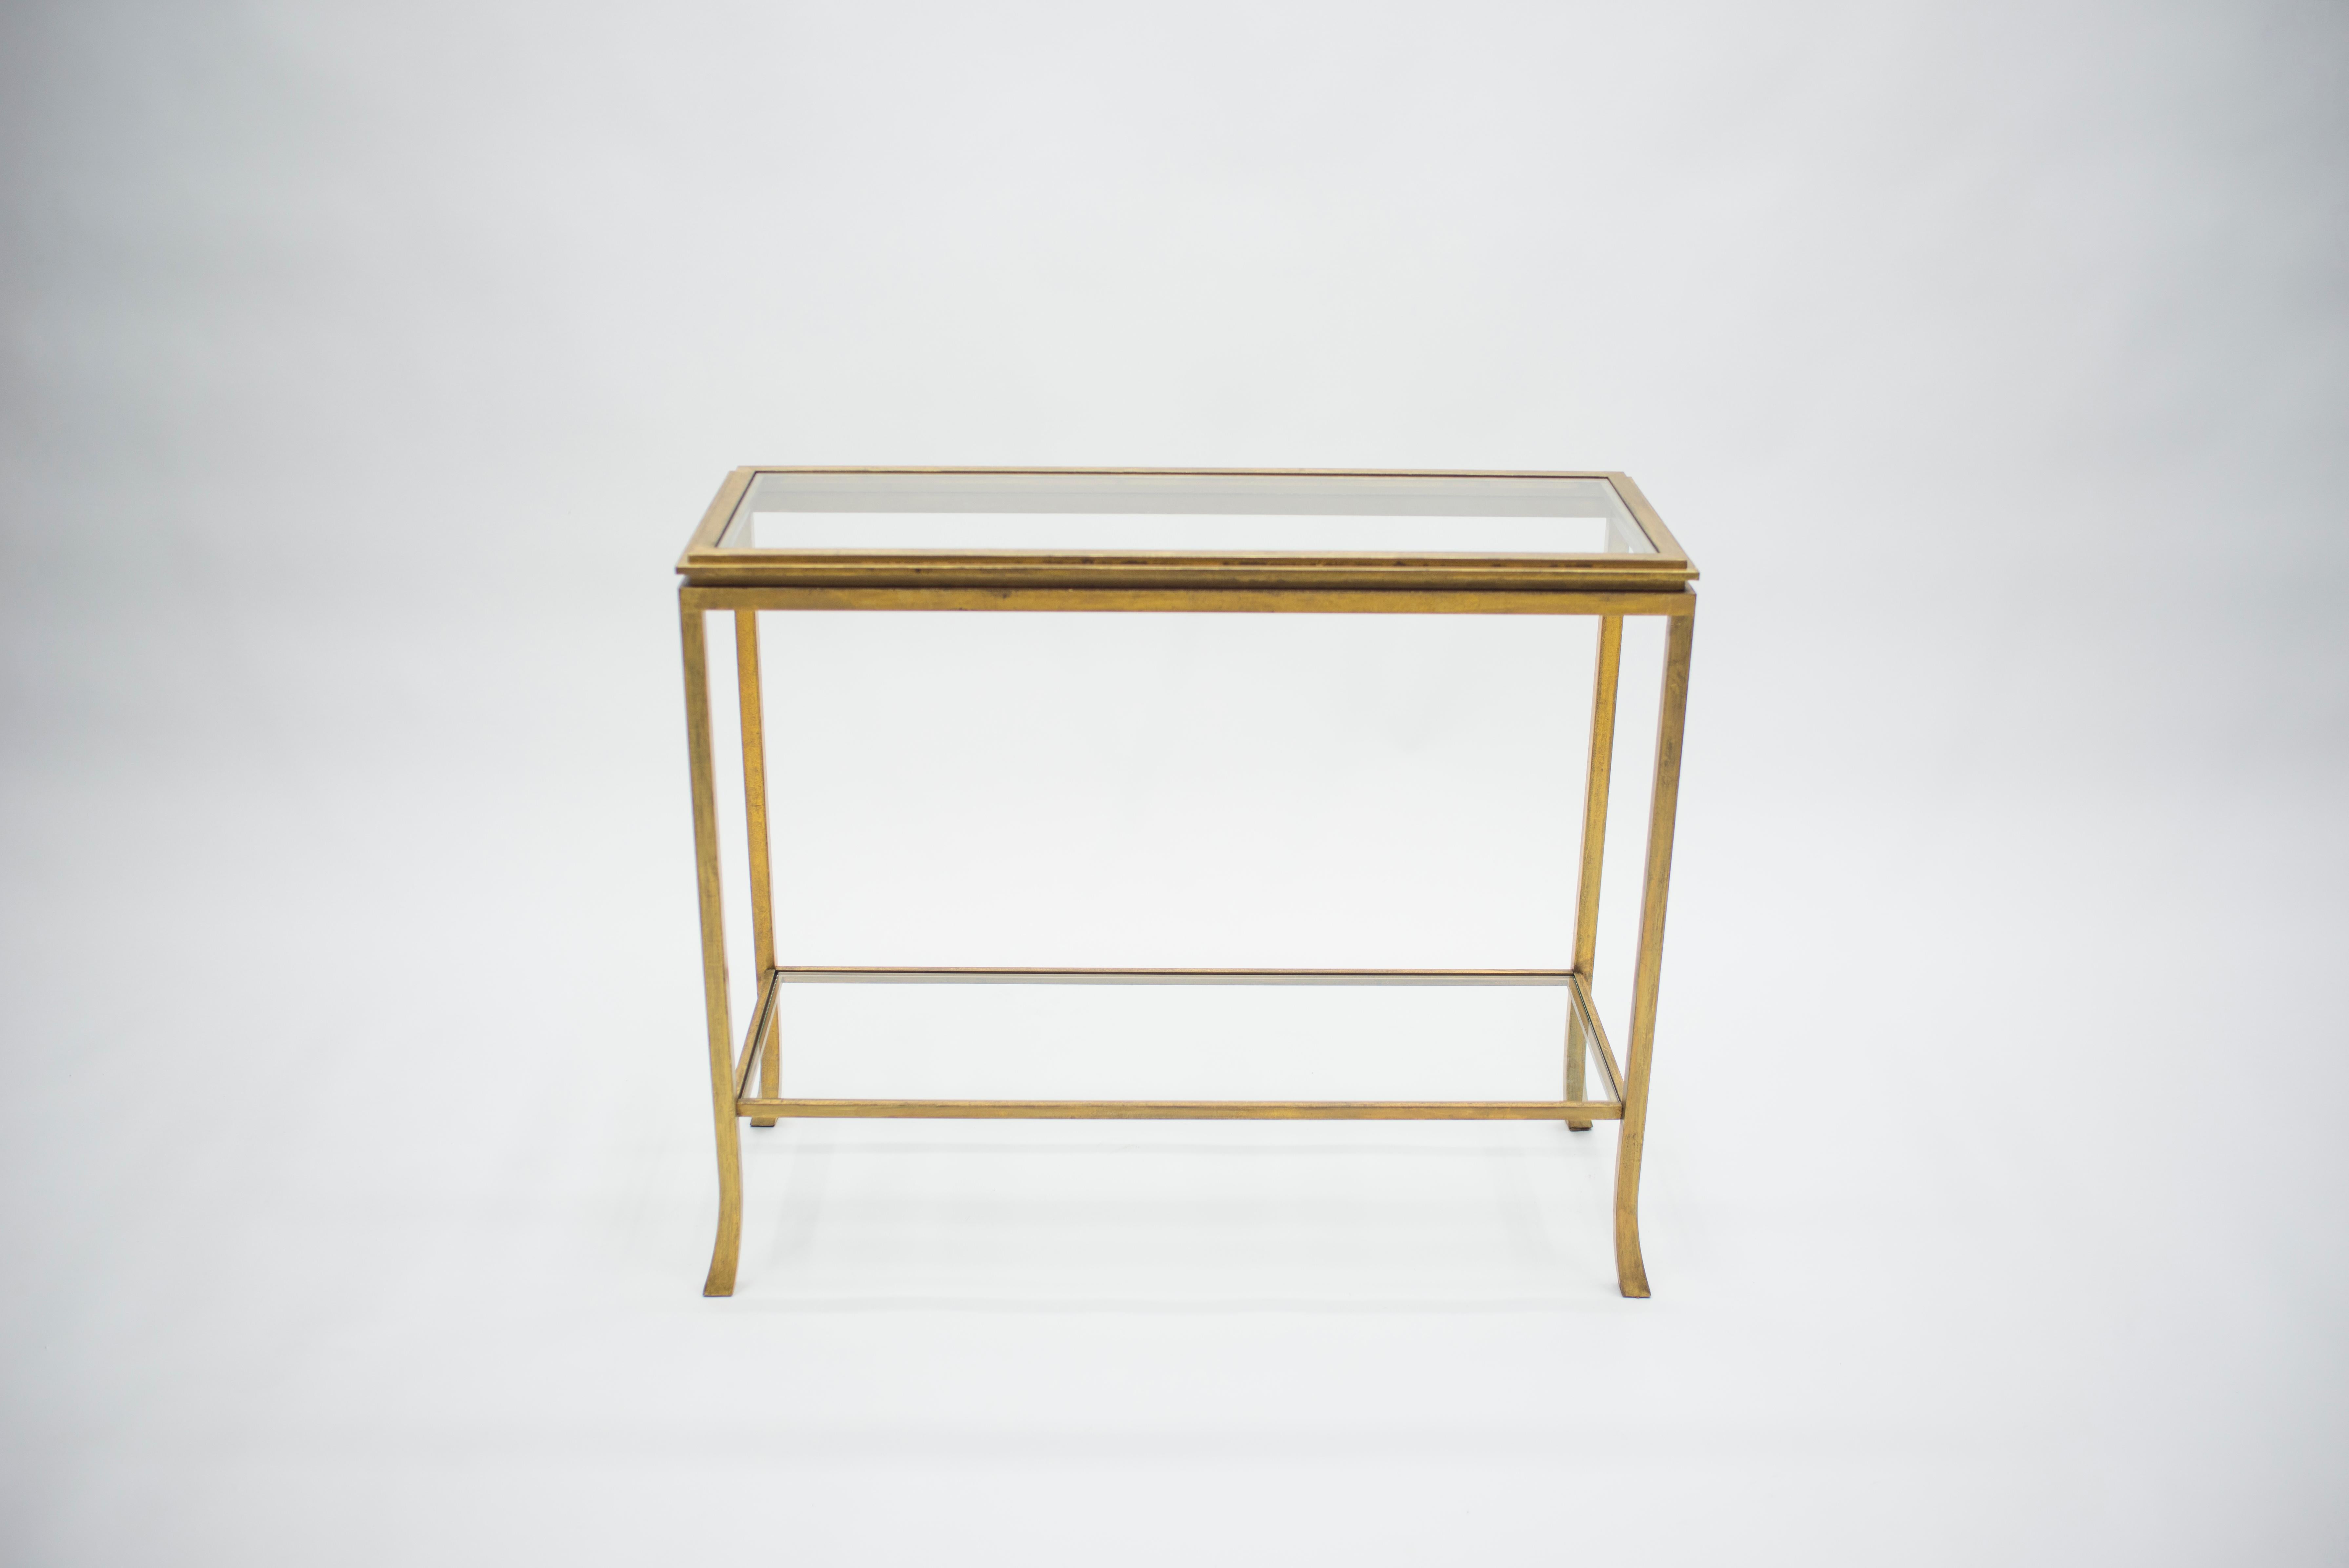 Glass Rare Mid Century Robert Thibier Gilt Wrought Iron Gold Leaf Console Table, 1960s